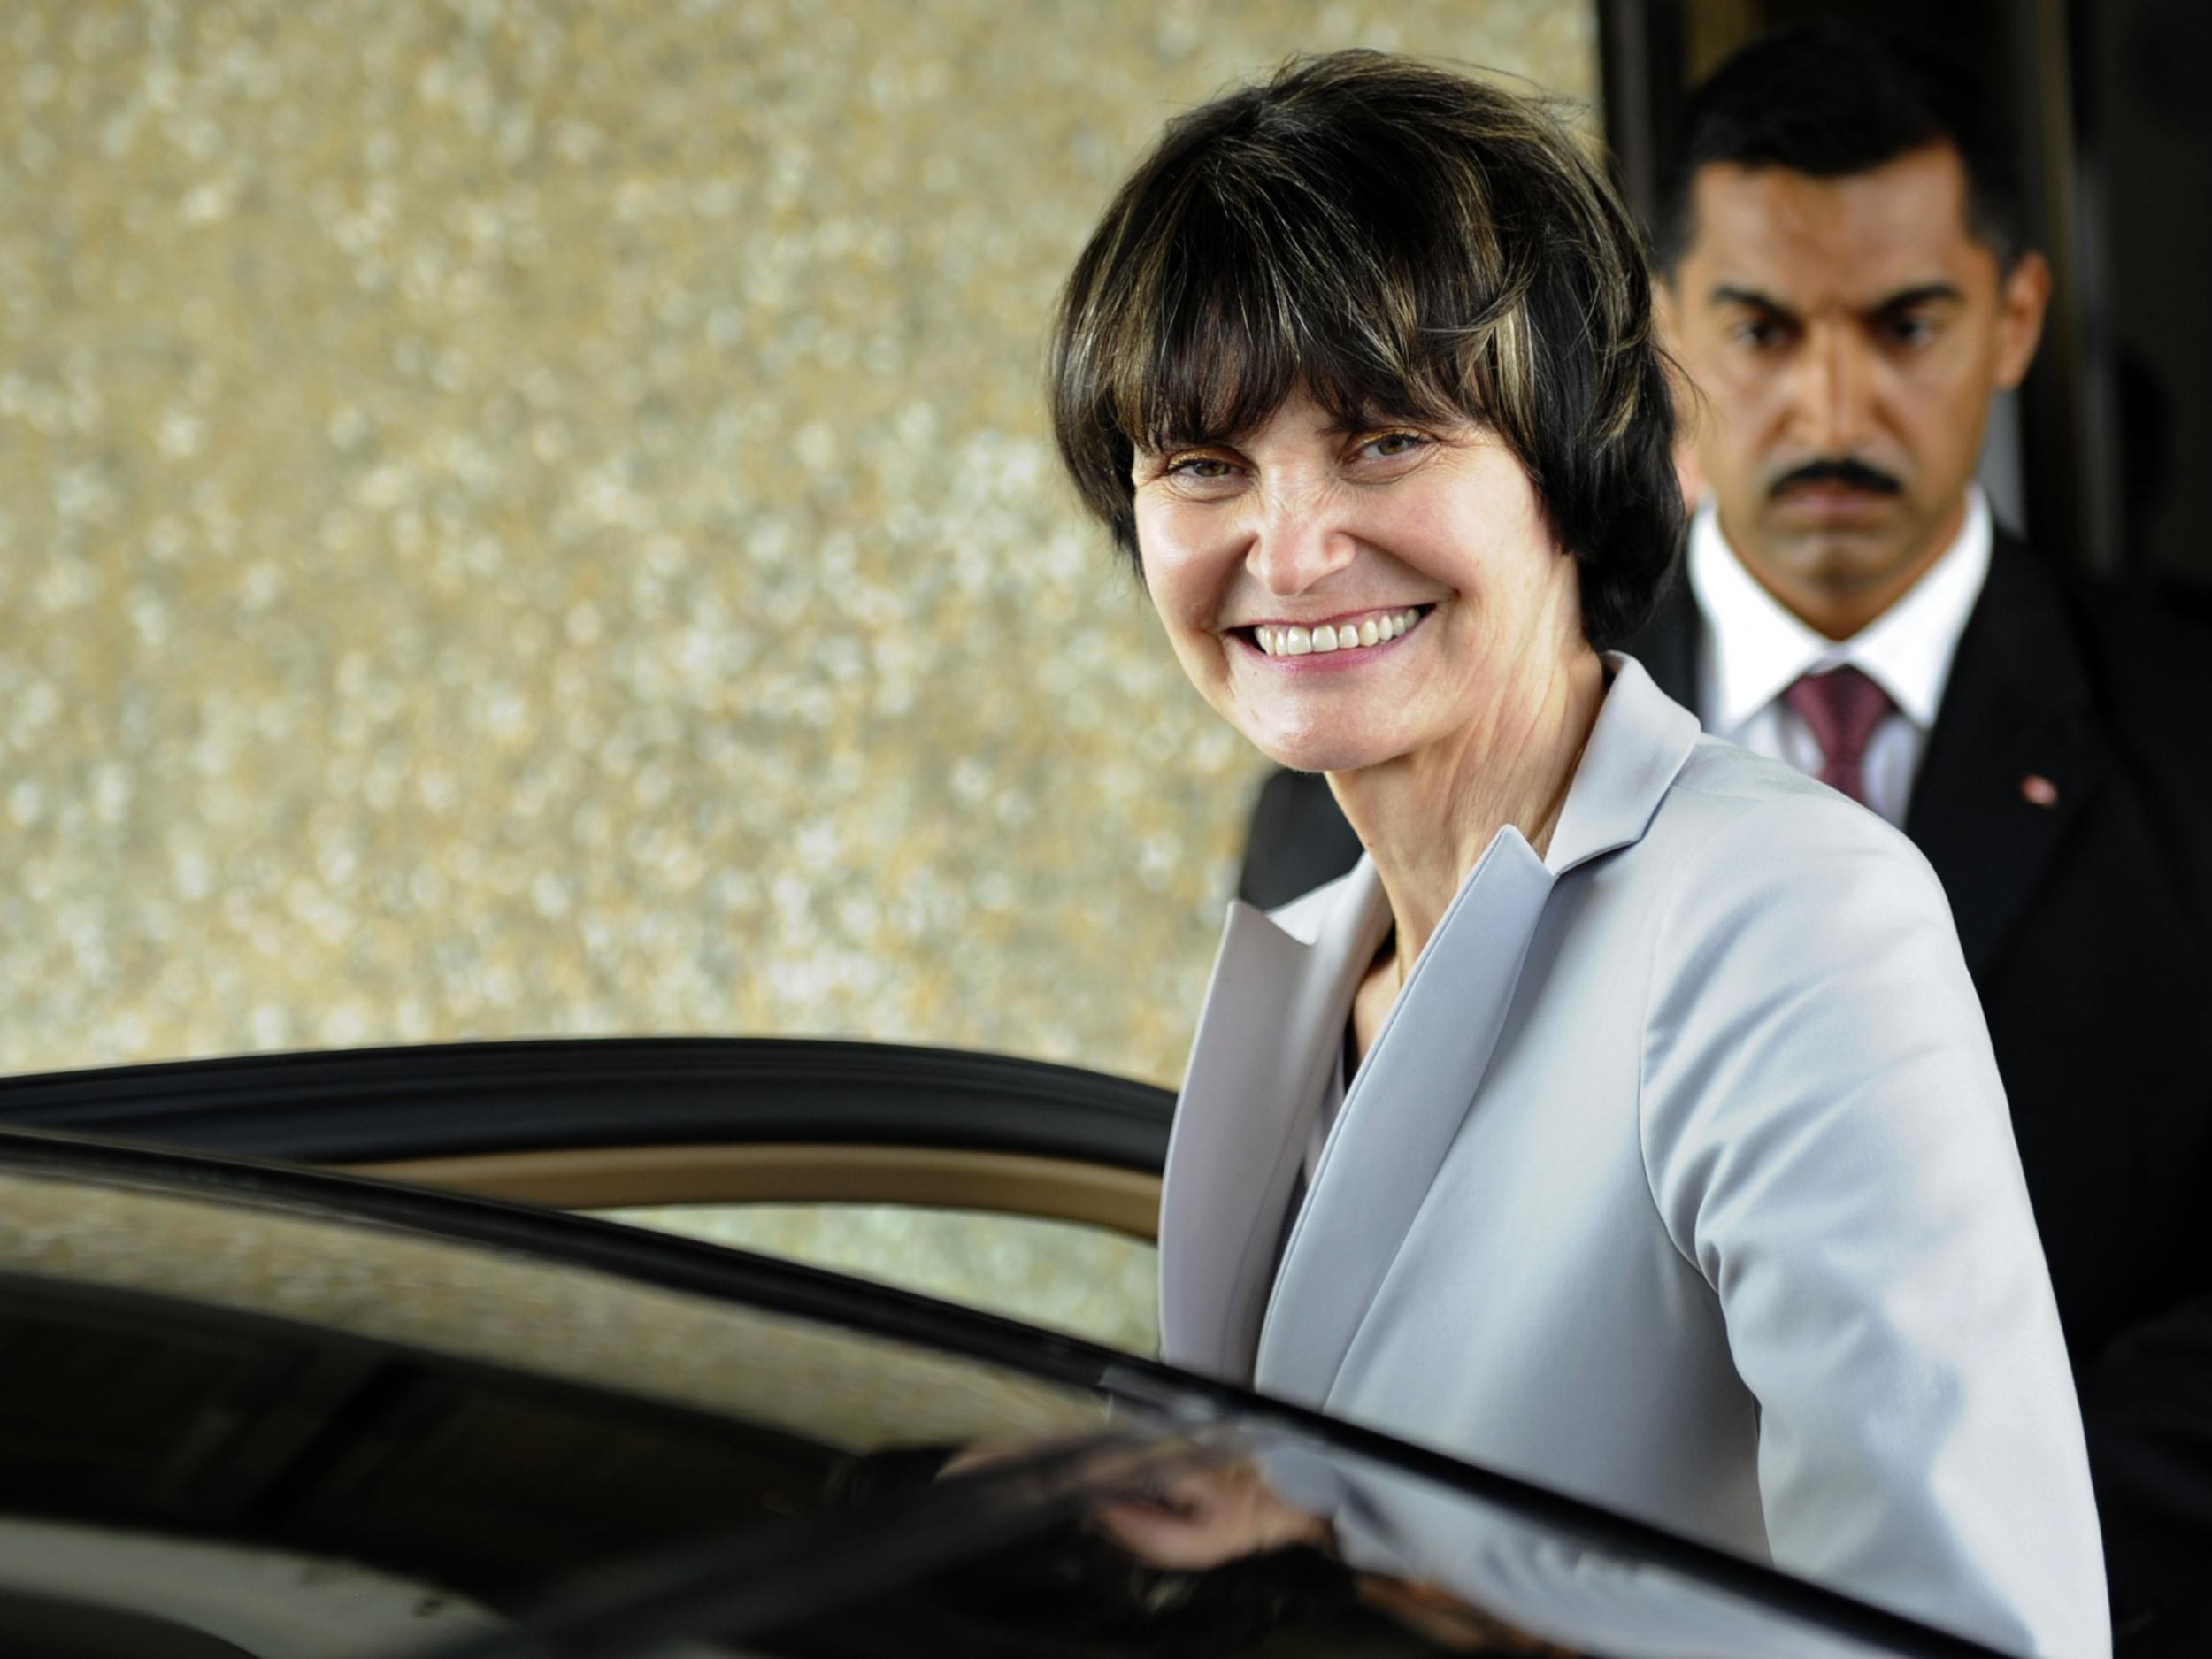 Micheline Calmy-Rey was president of the Swiss confederation in 2007 and 2011